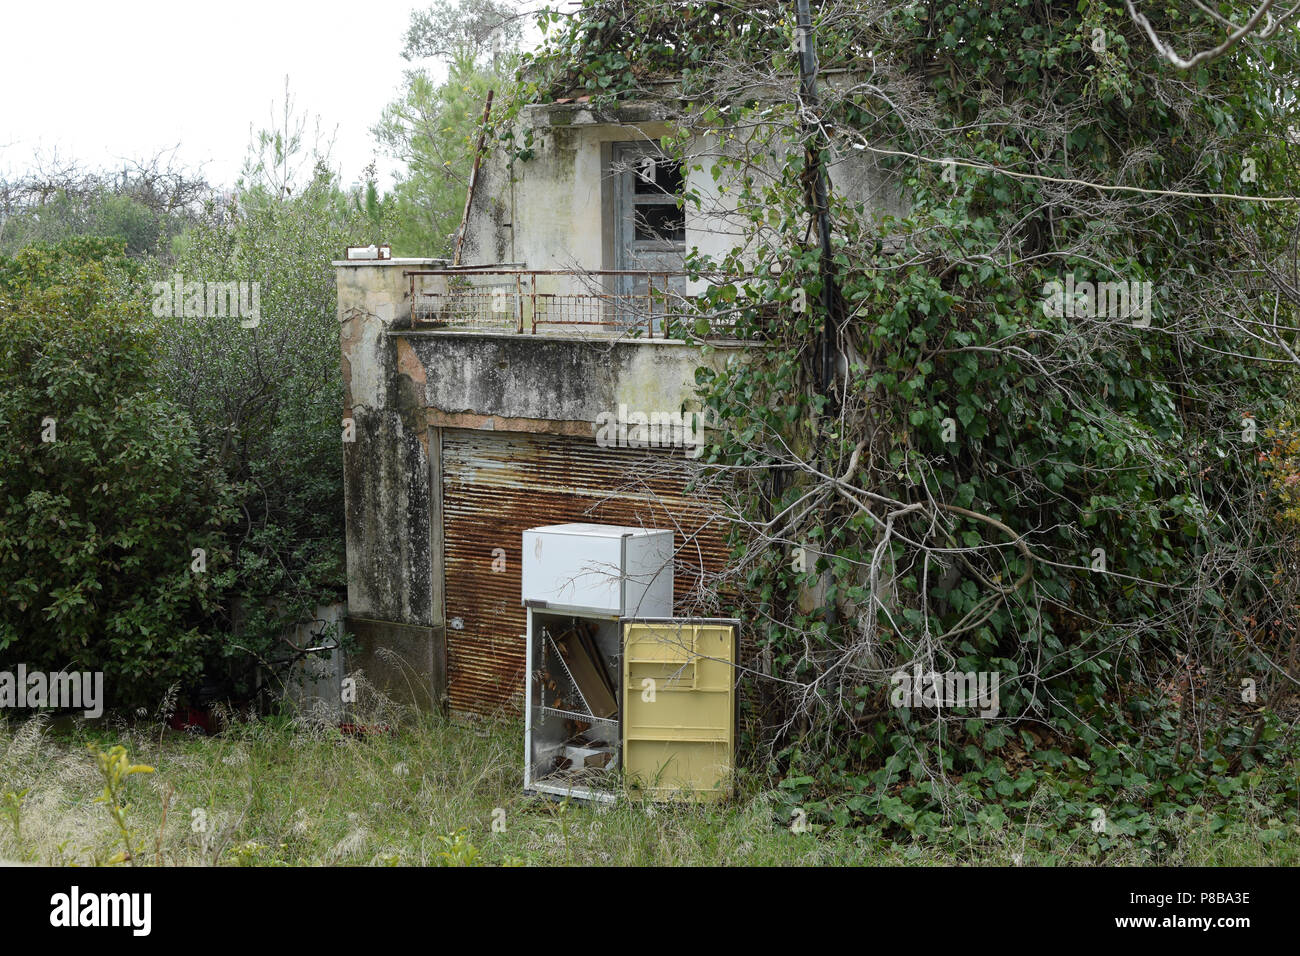 Abandoned house overrun by nature and discarded fridge in garden with overgrown plants. Stock Photo